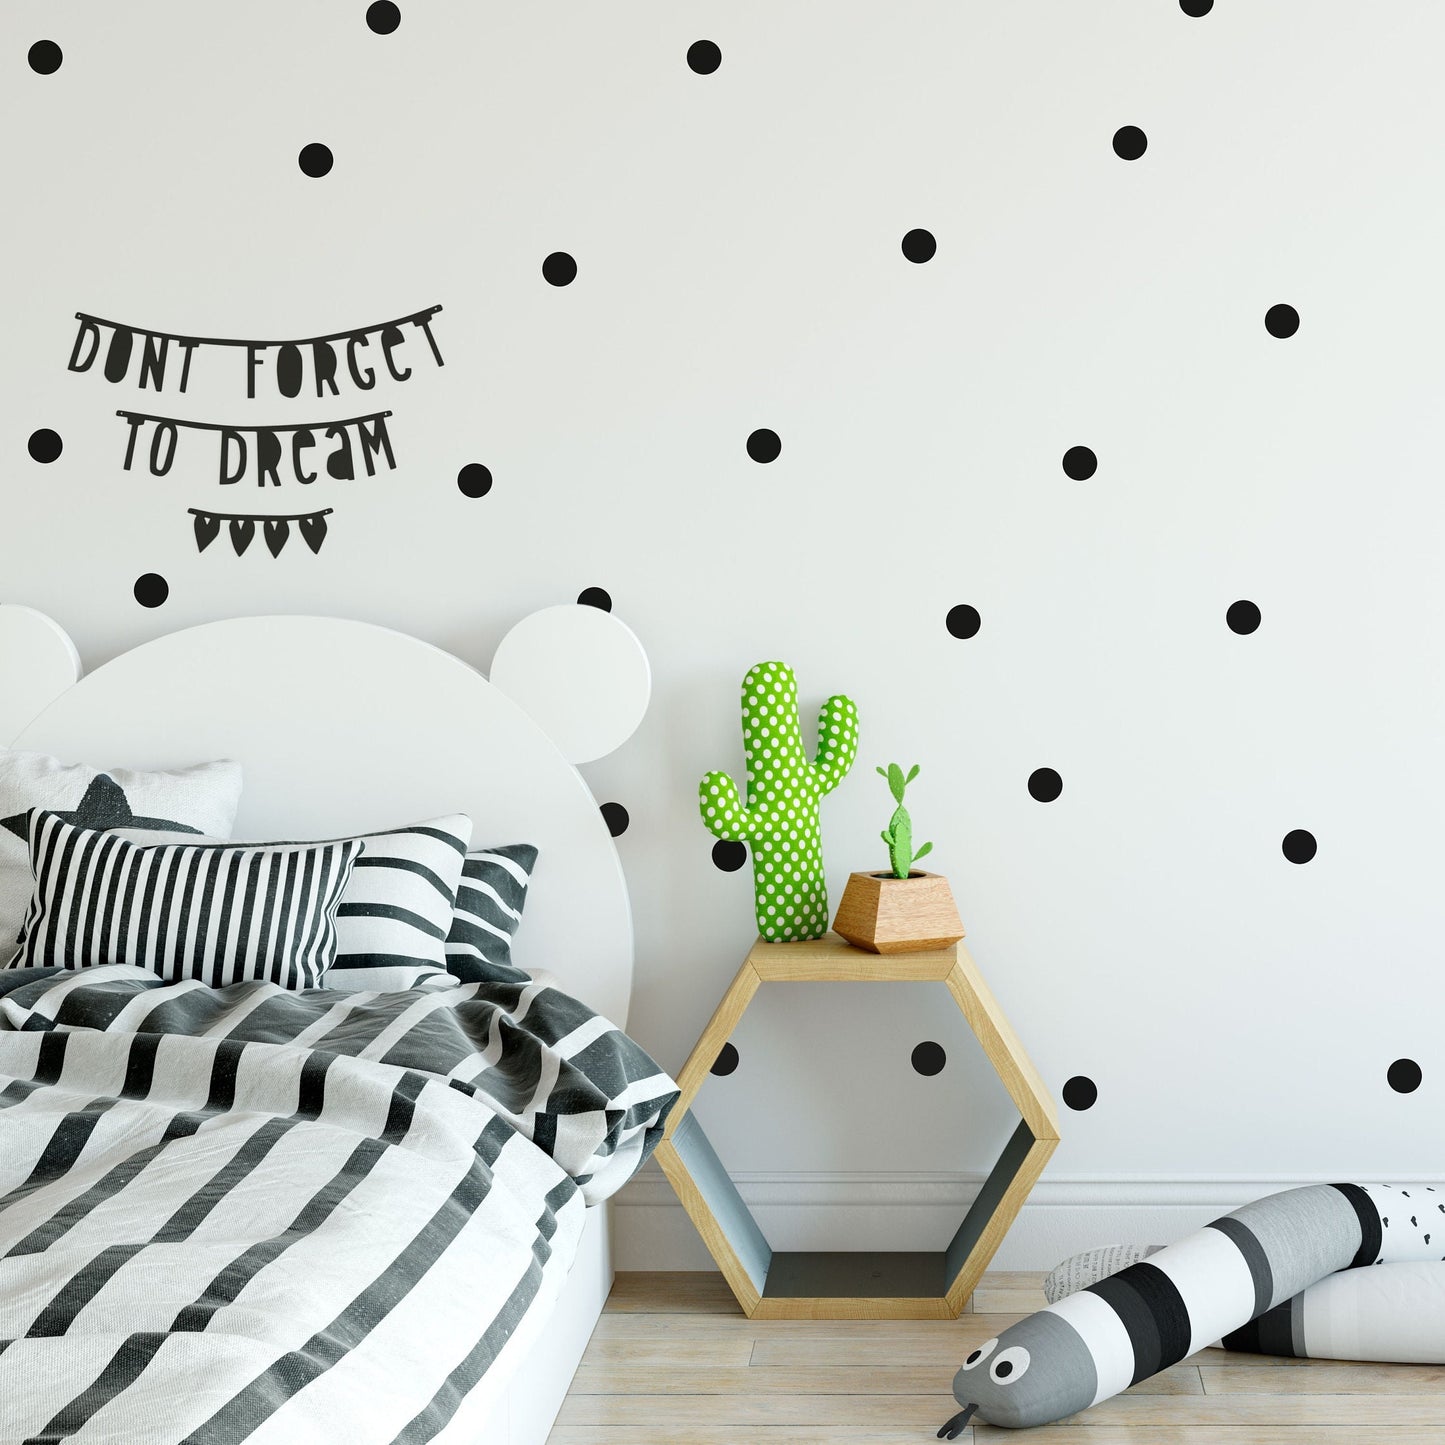 Polka Dot Wall Decals, Polka Dot Wall Stickers, Childrens Wall Stickers, Nursery Wall Art, Vinyl Stickers, Removable Wall Decor